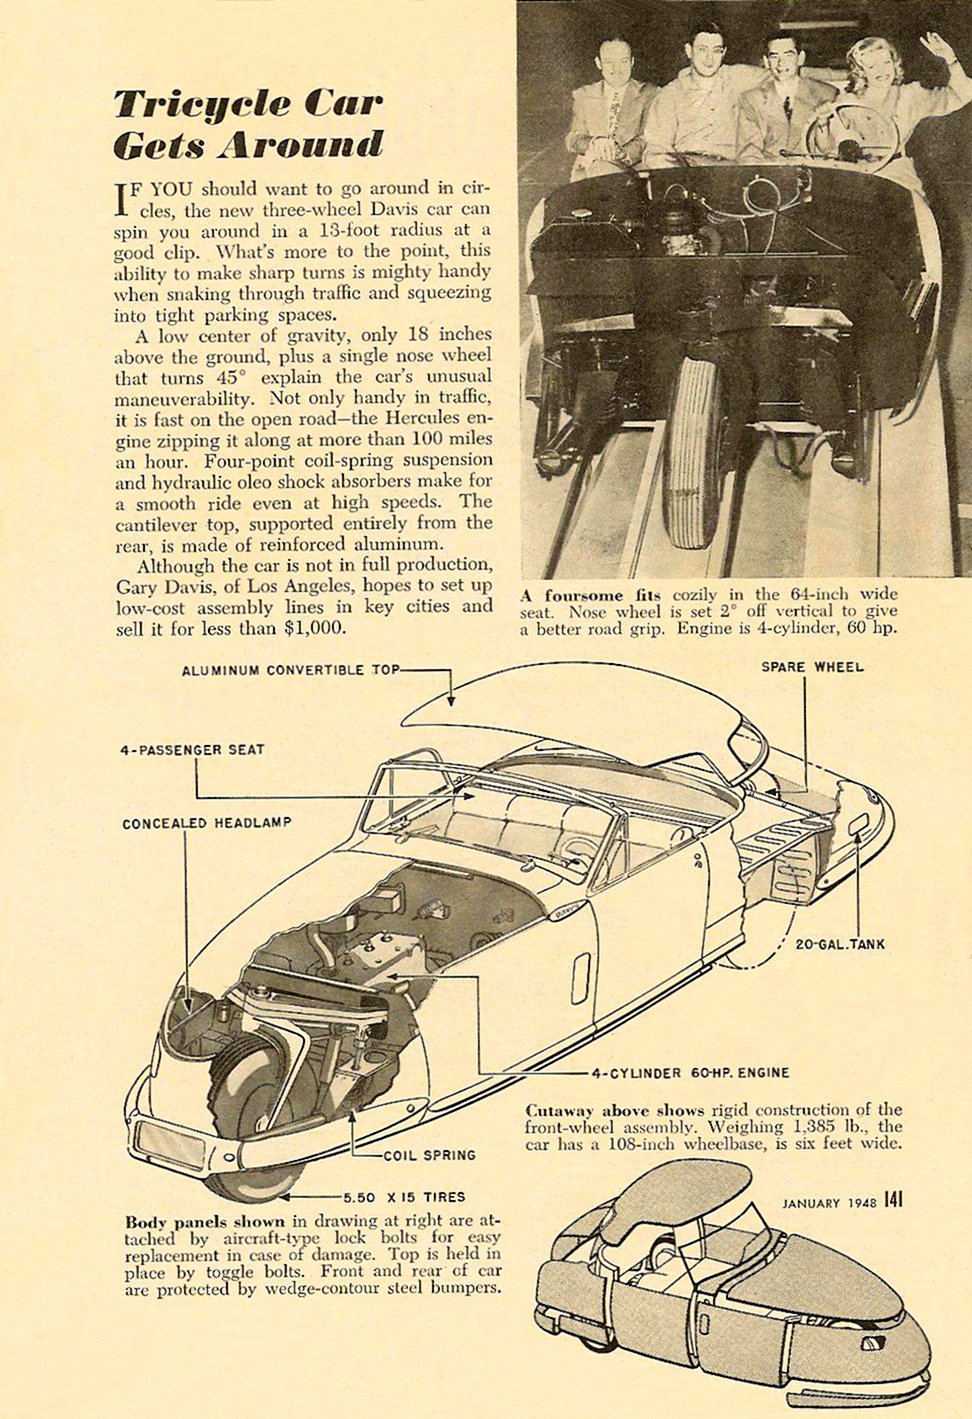 Page 141 of the January 1948 issue of Popular Science magazine